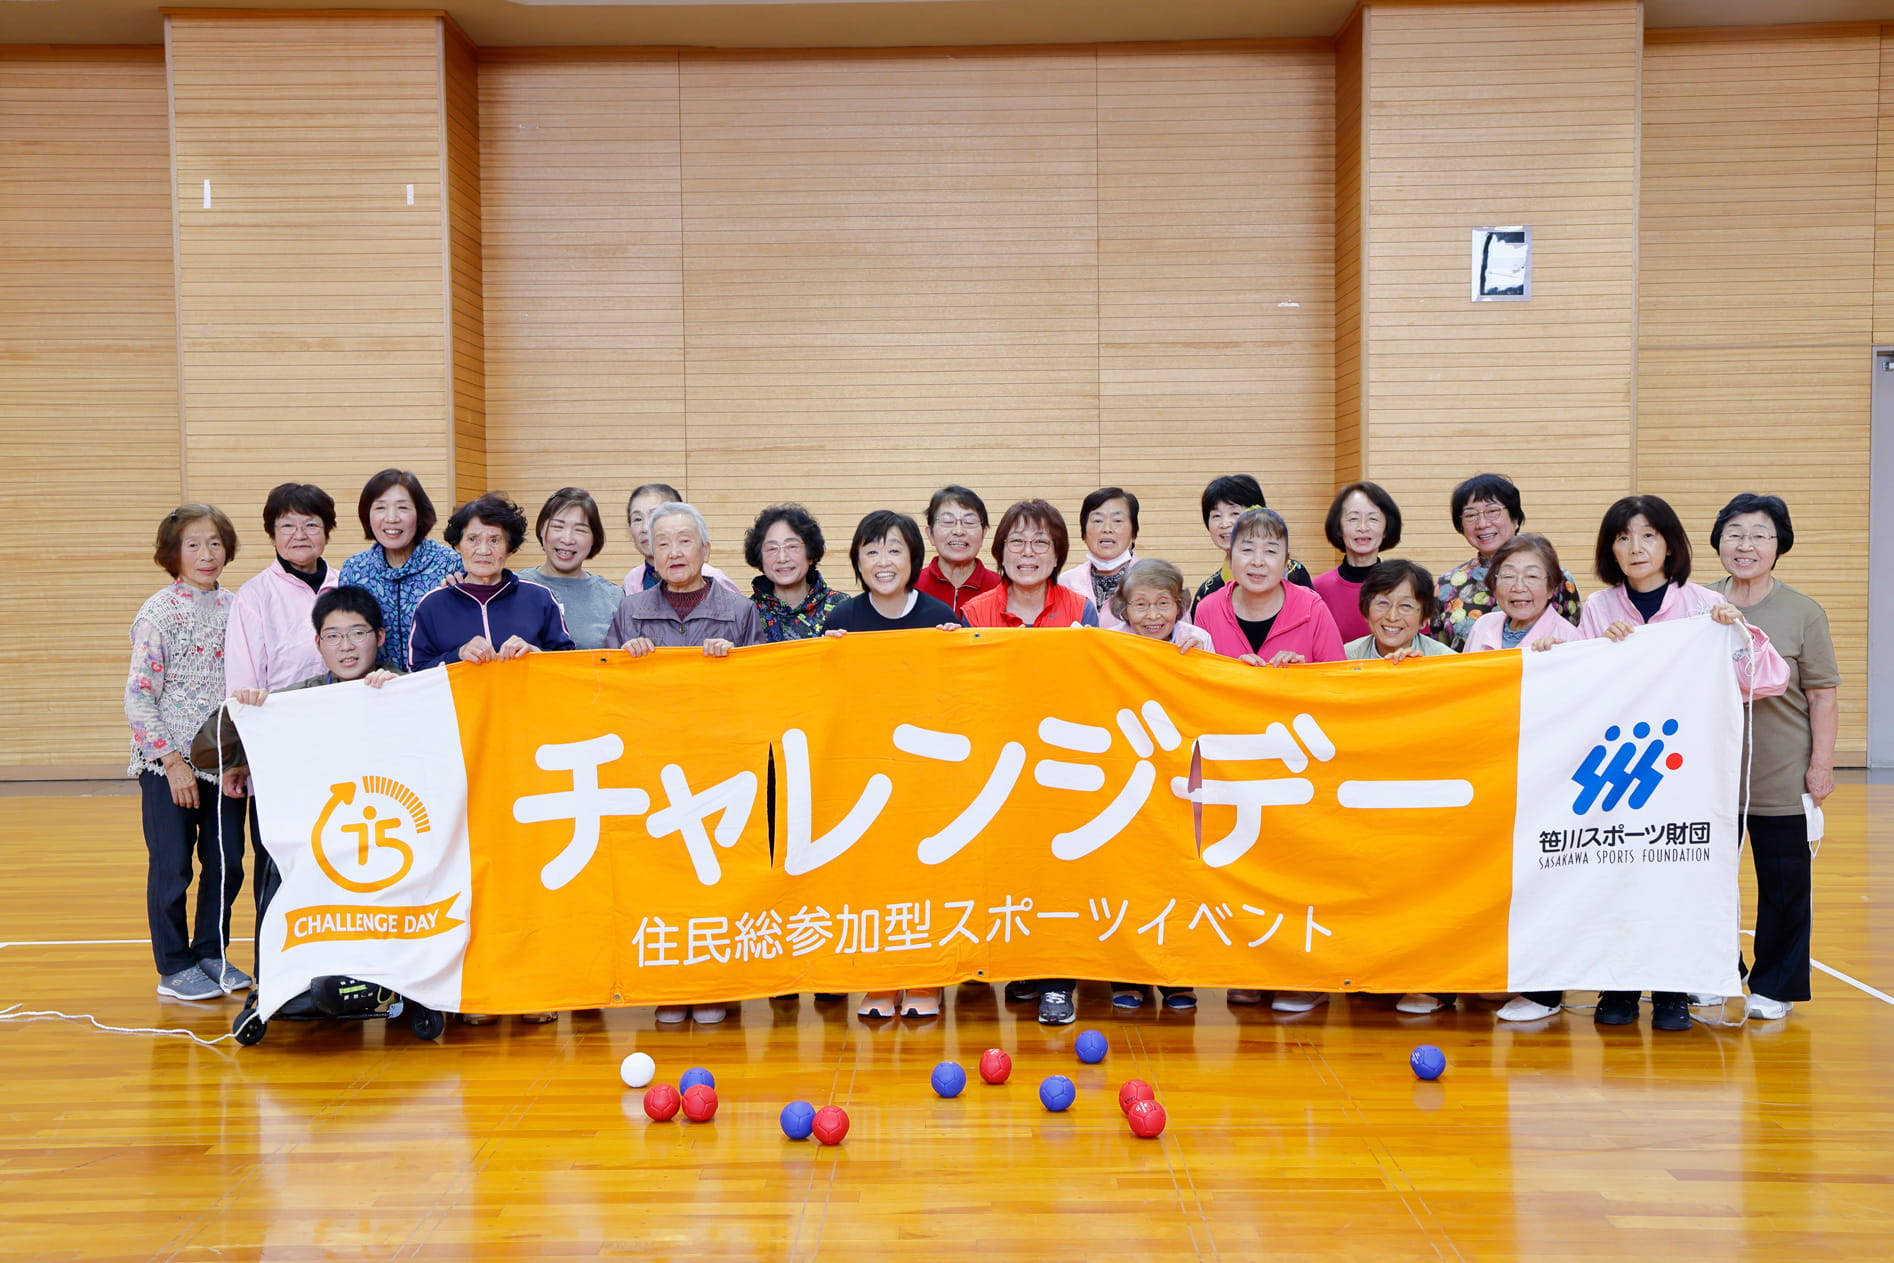 Multiple local sports groups participated in Challenge Day 2021 in Fukuchiyama.